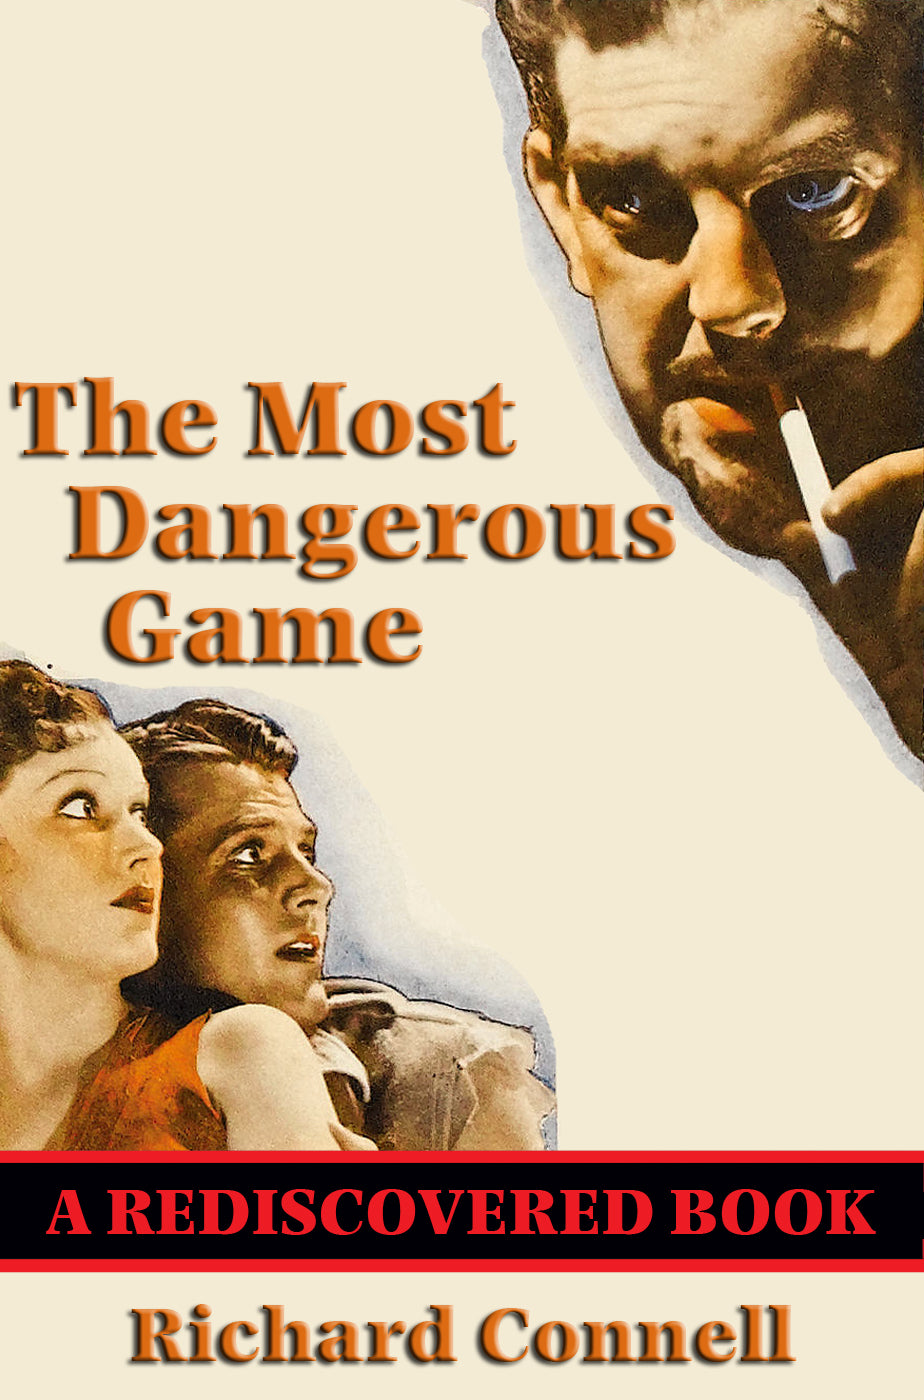 Cover art for The Most Dangerous Game.